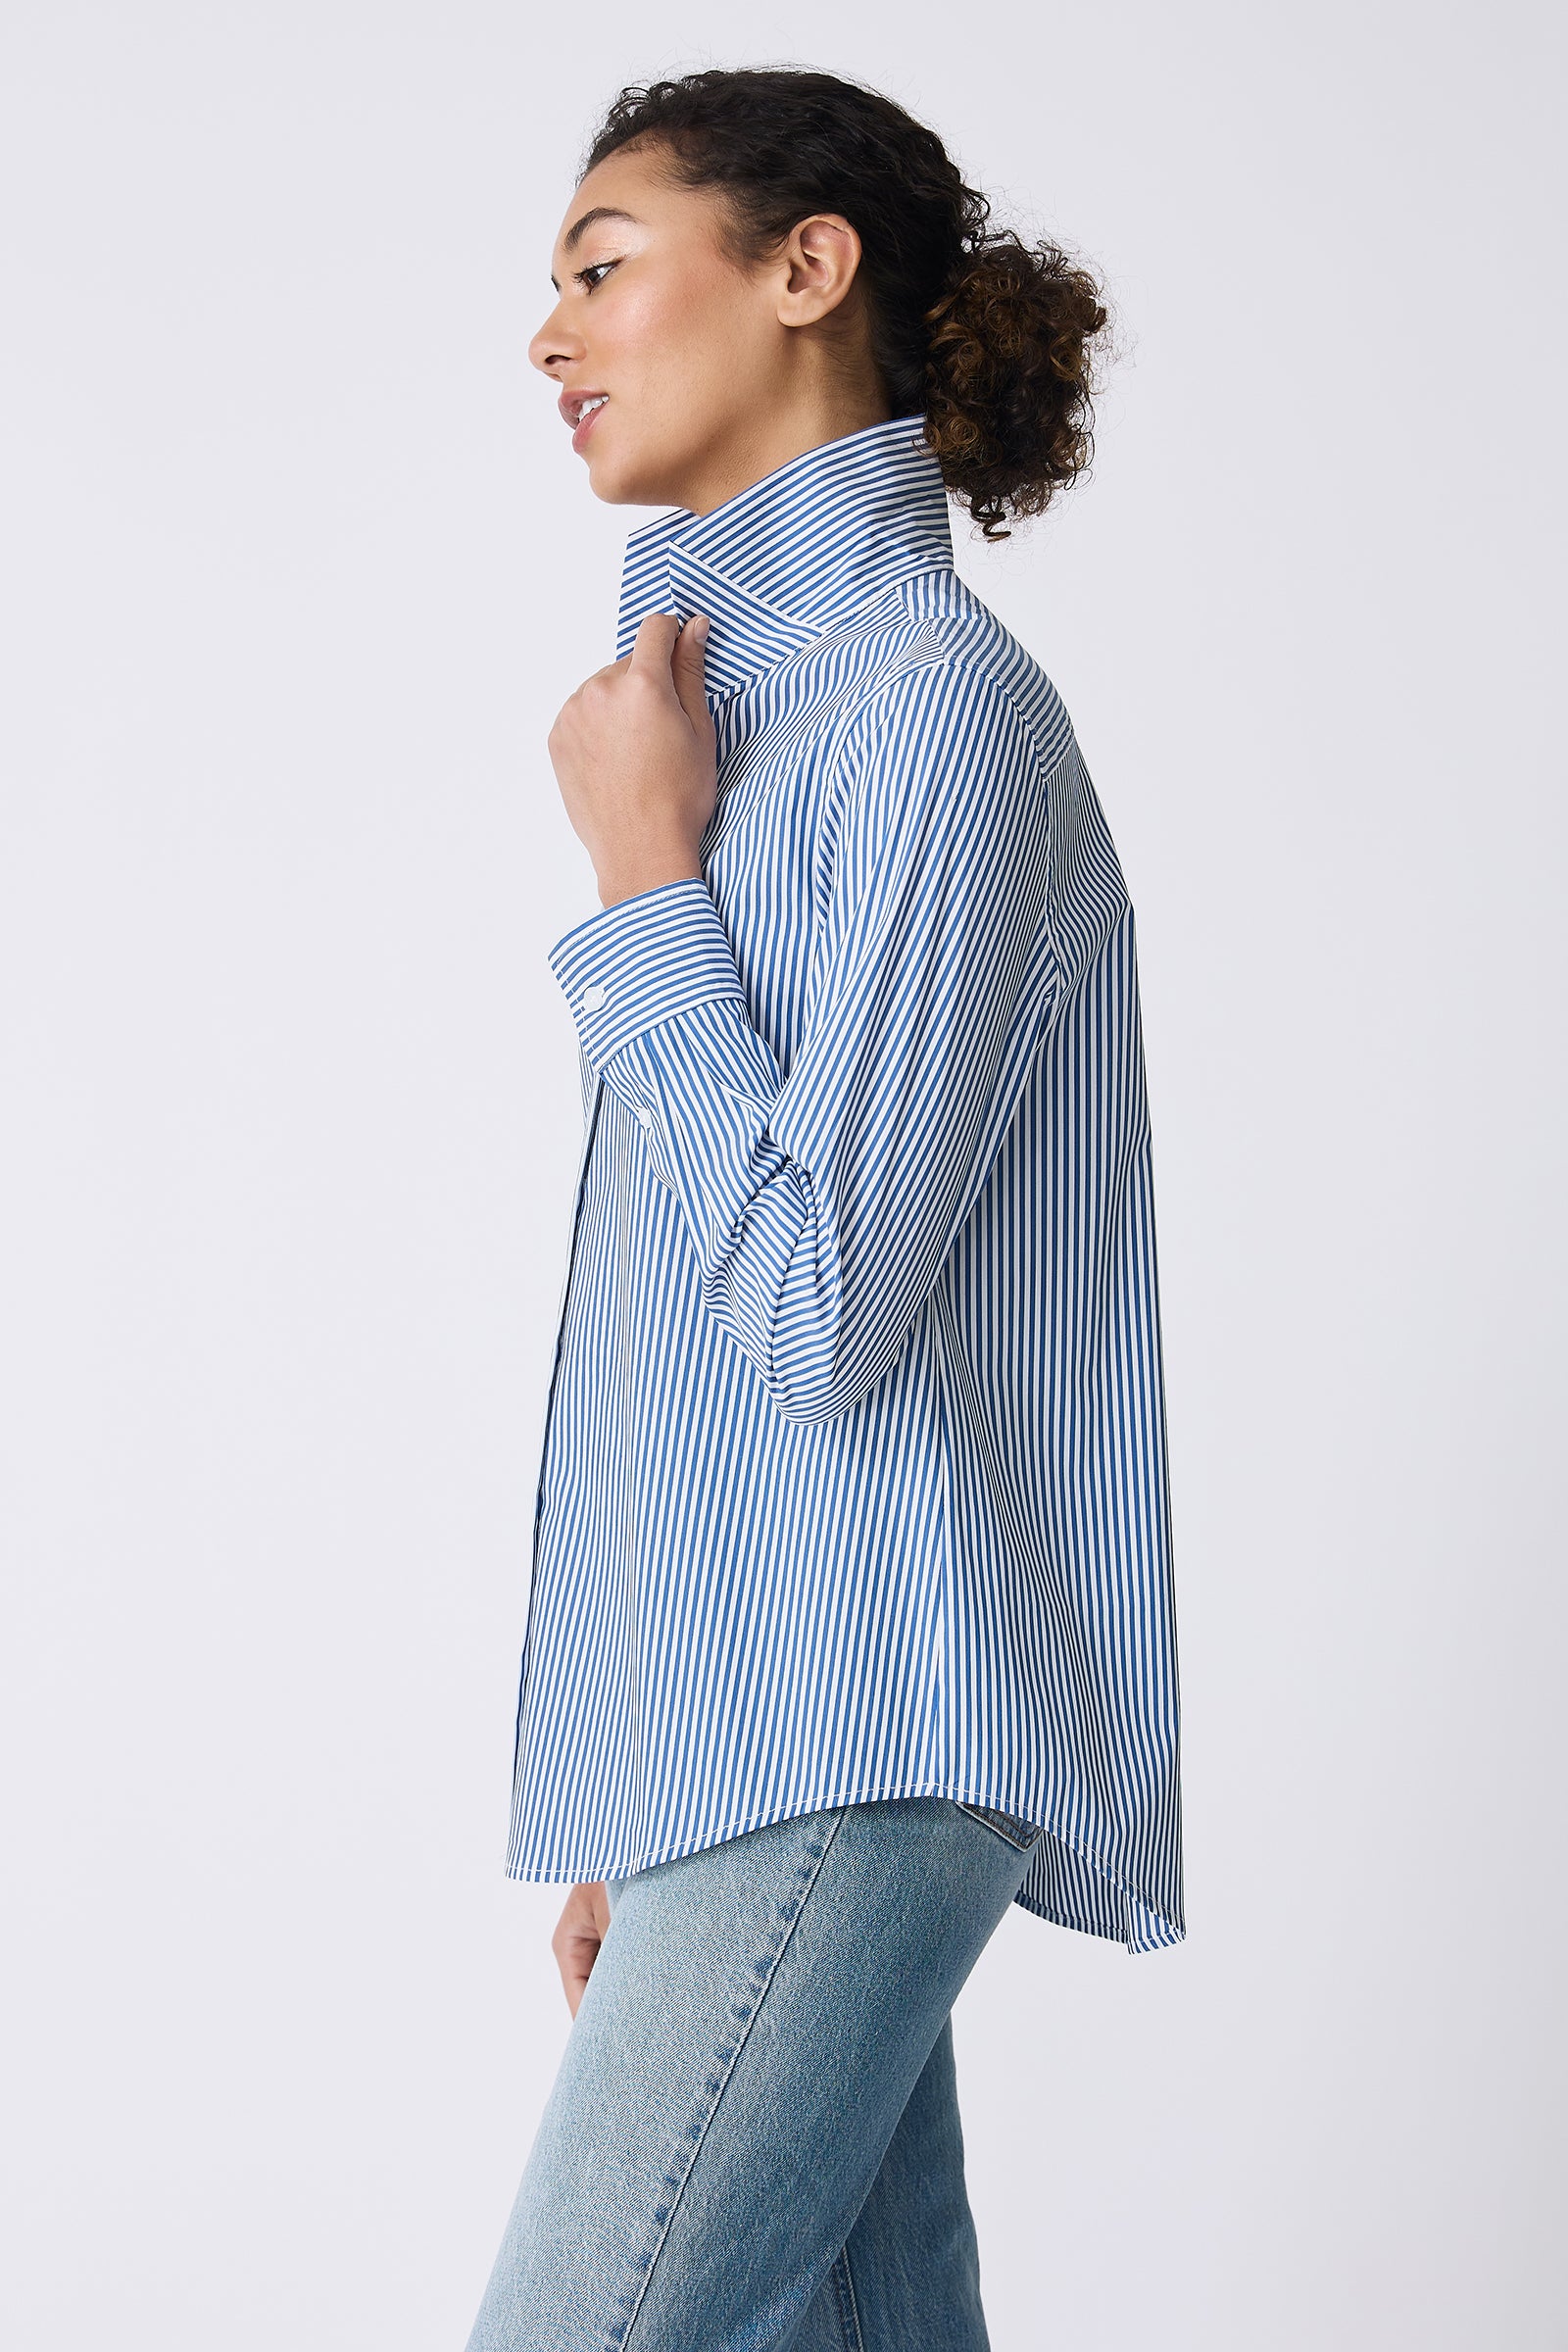 Kal Rieman image of the Ginna Box Pleat Shirt in Miami Stripe Blue on model side view